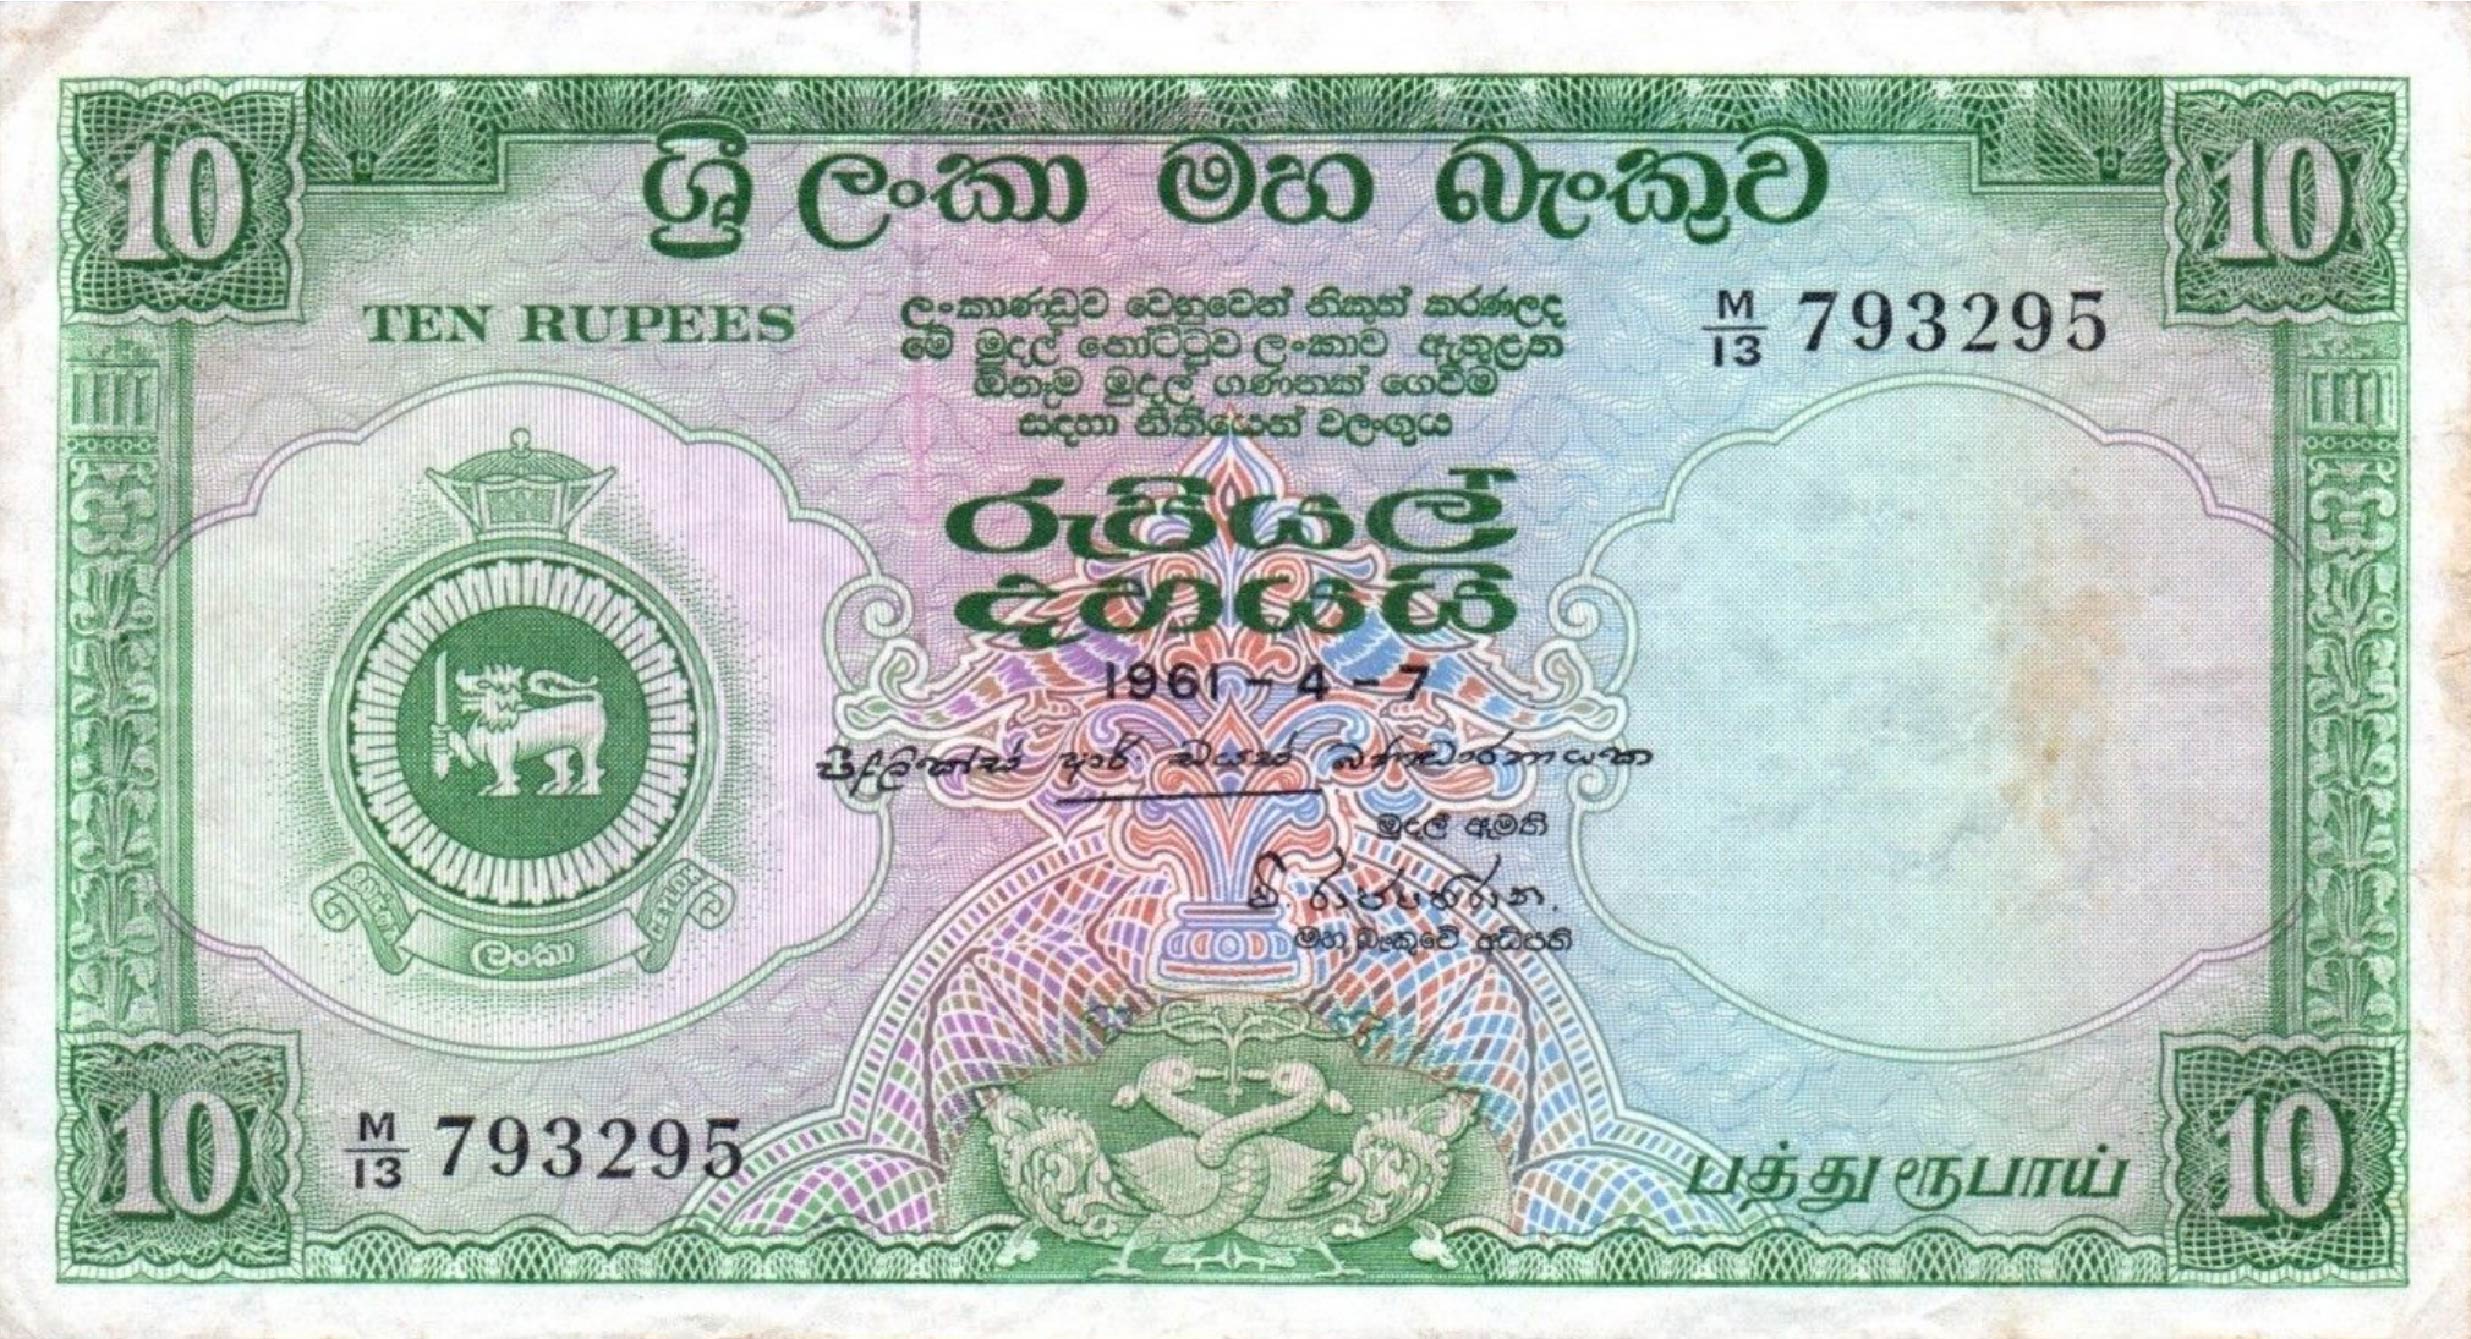 10 rupees Central Bank of Ceylon banknote (Armorial Ensign series)